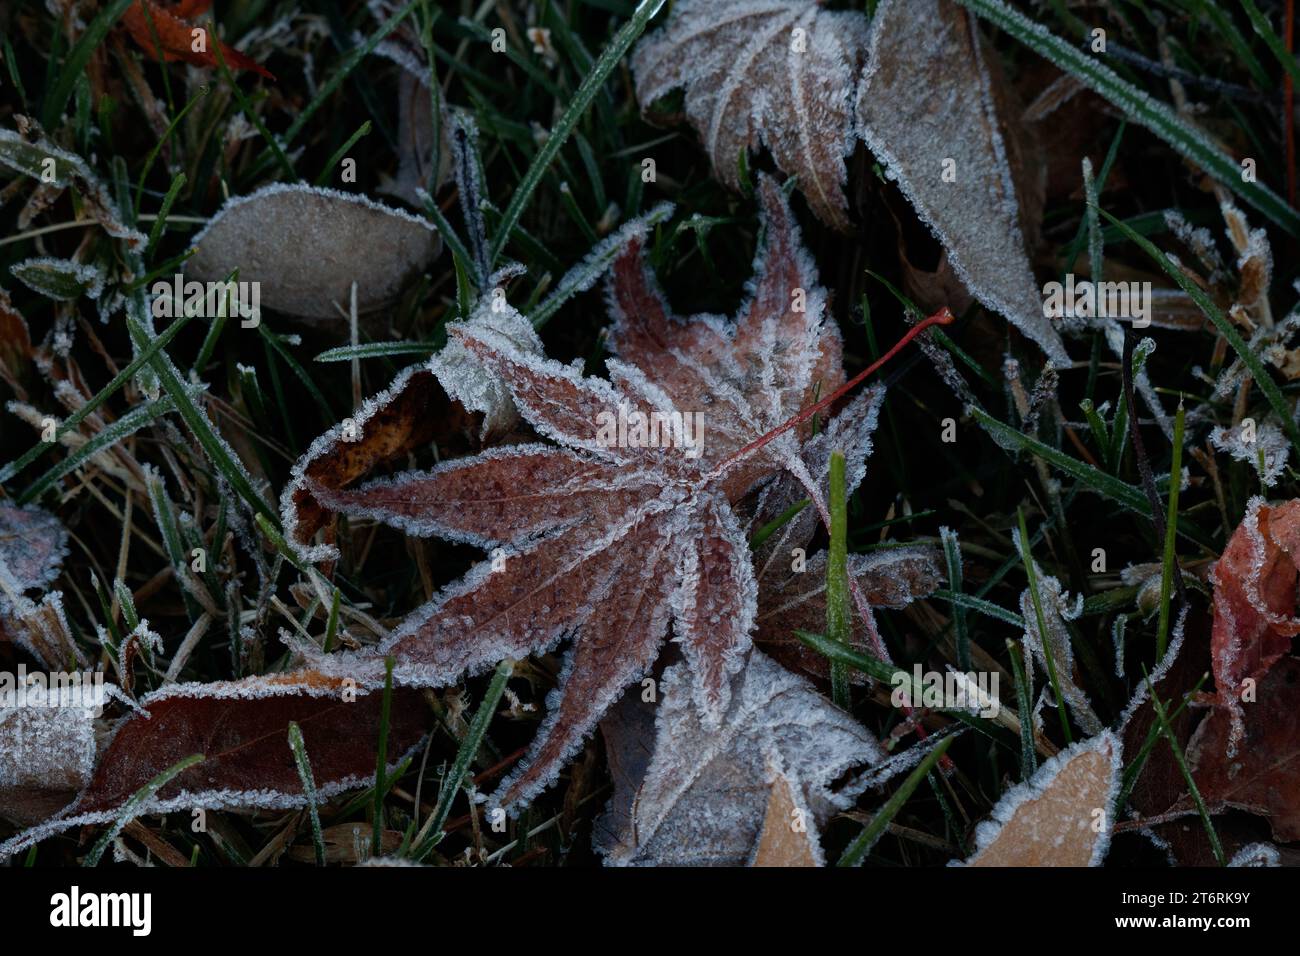 Ice crystals from a morning frost on a Japanese maple leaf which is lying on the grass near other leaves. Stock Photo